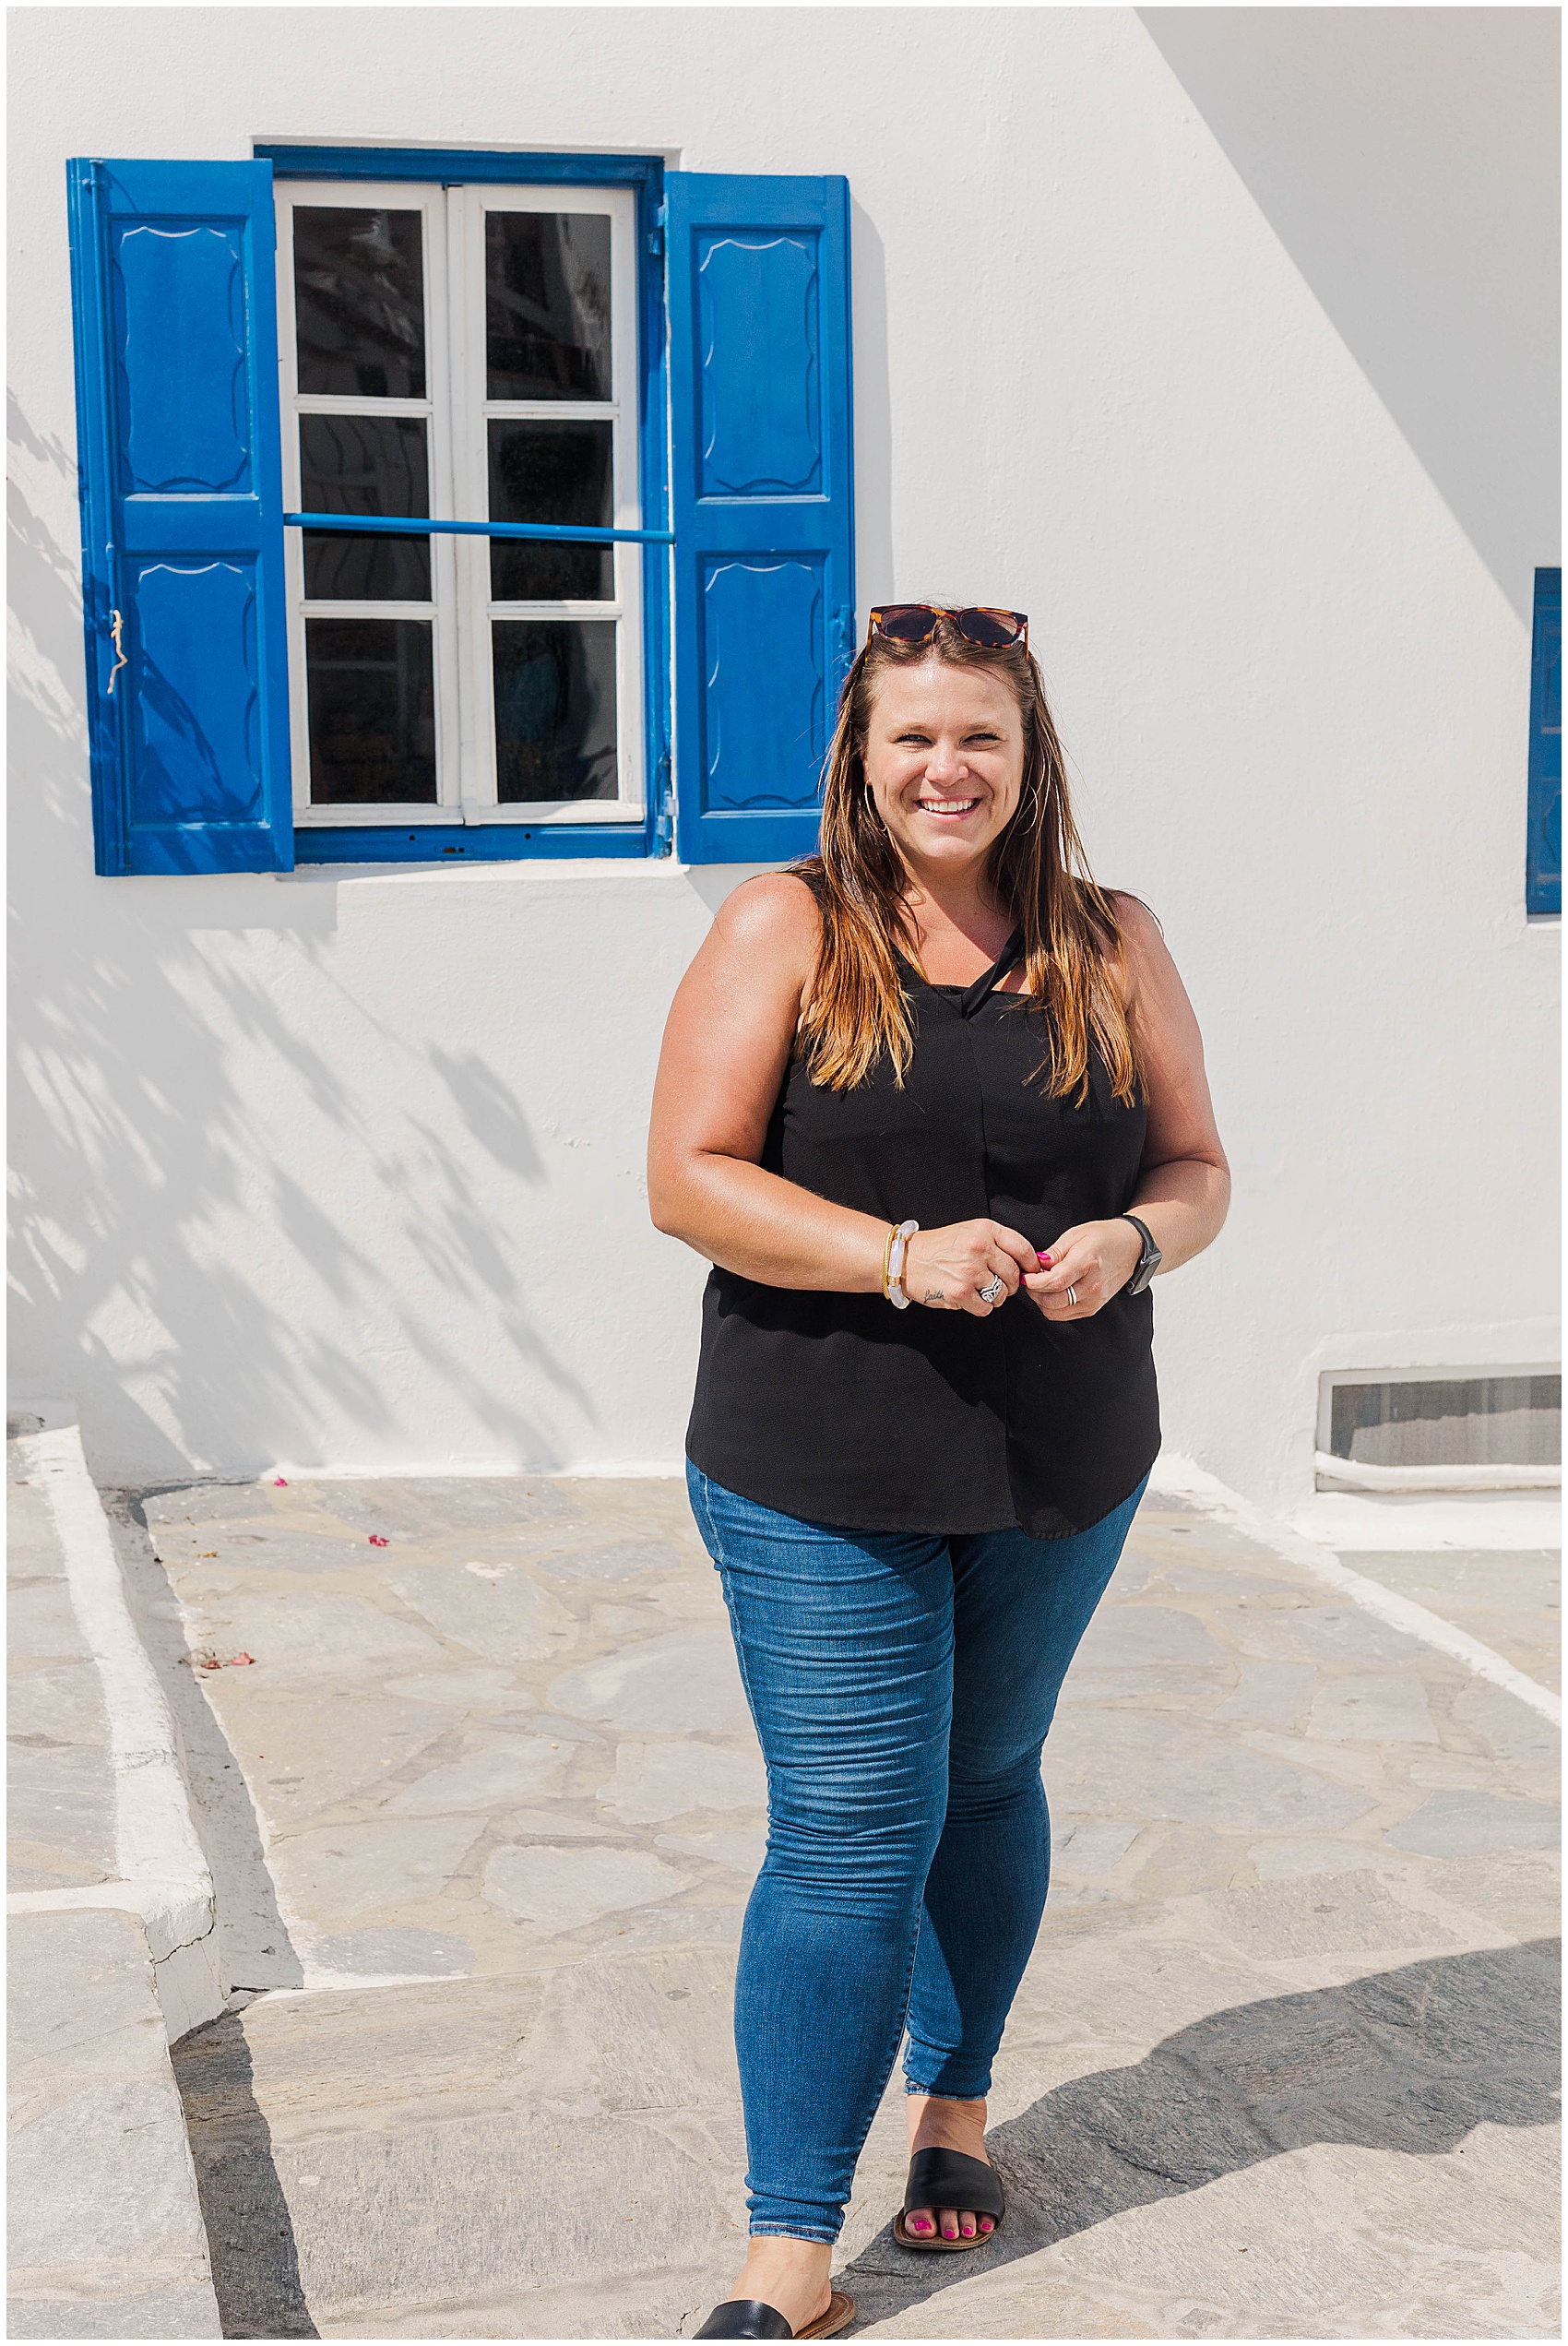 nicole standing in front of blue shutters greece photoshoot